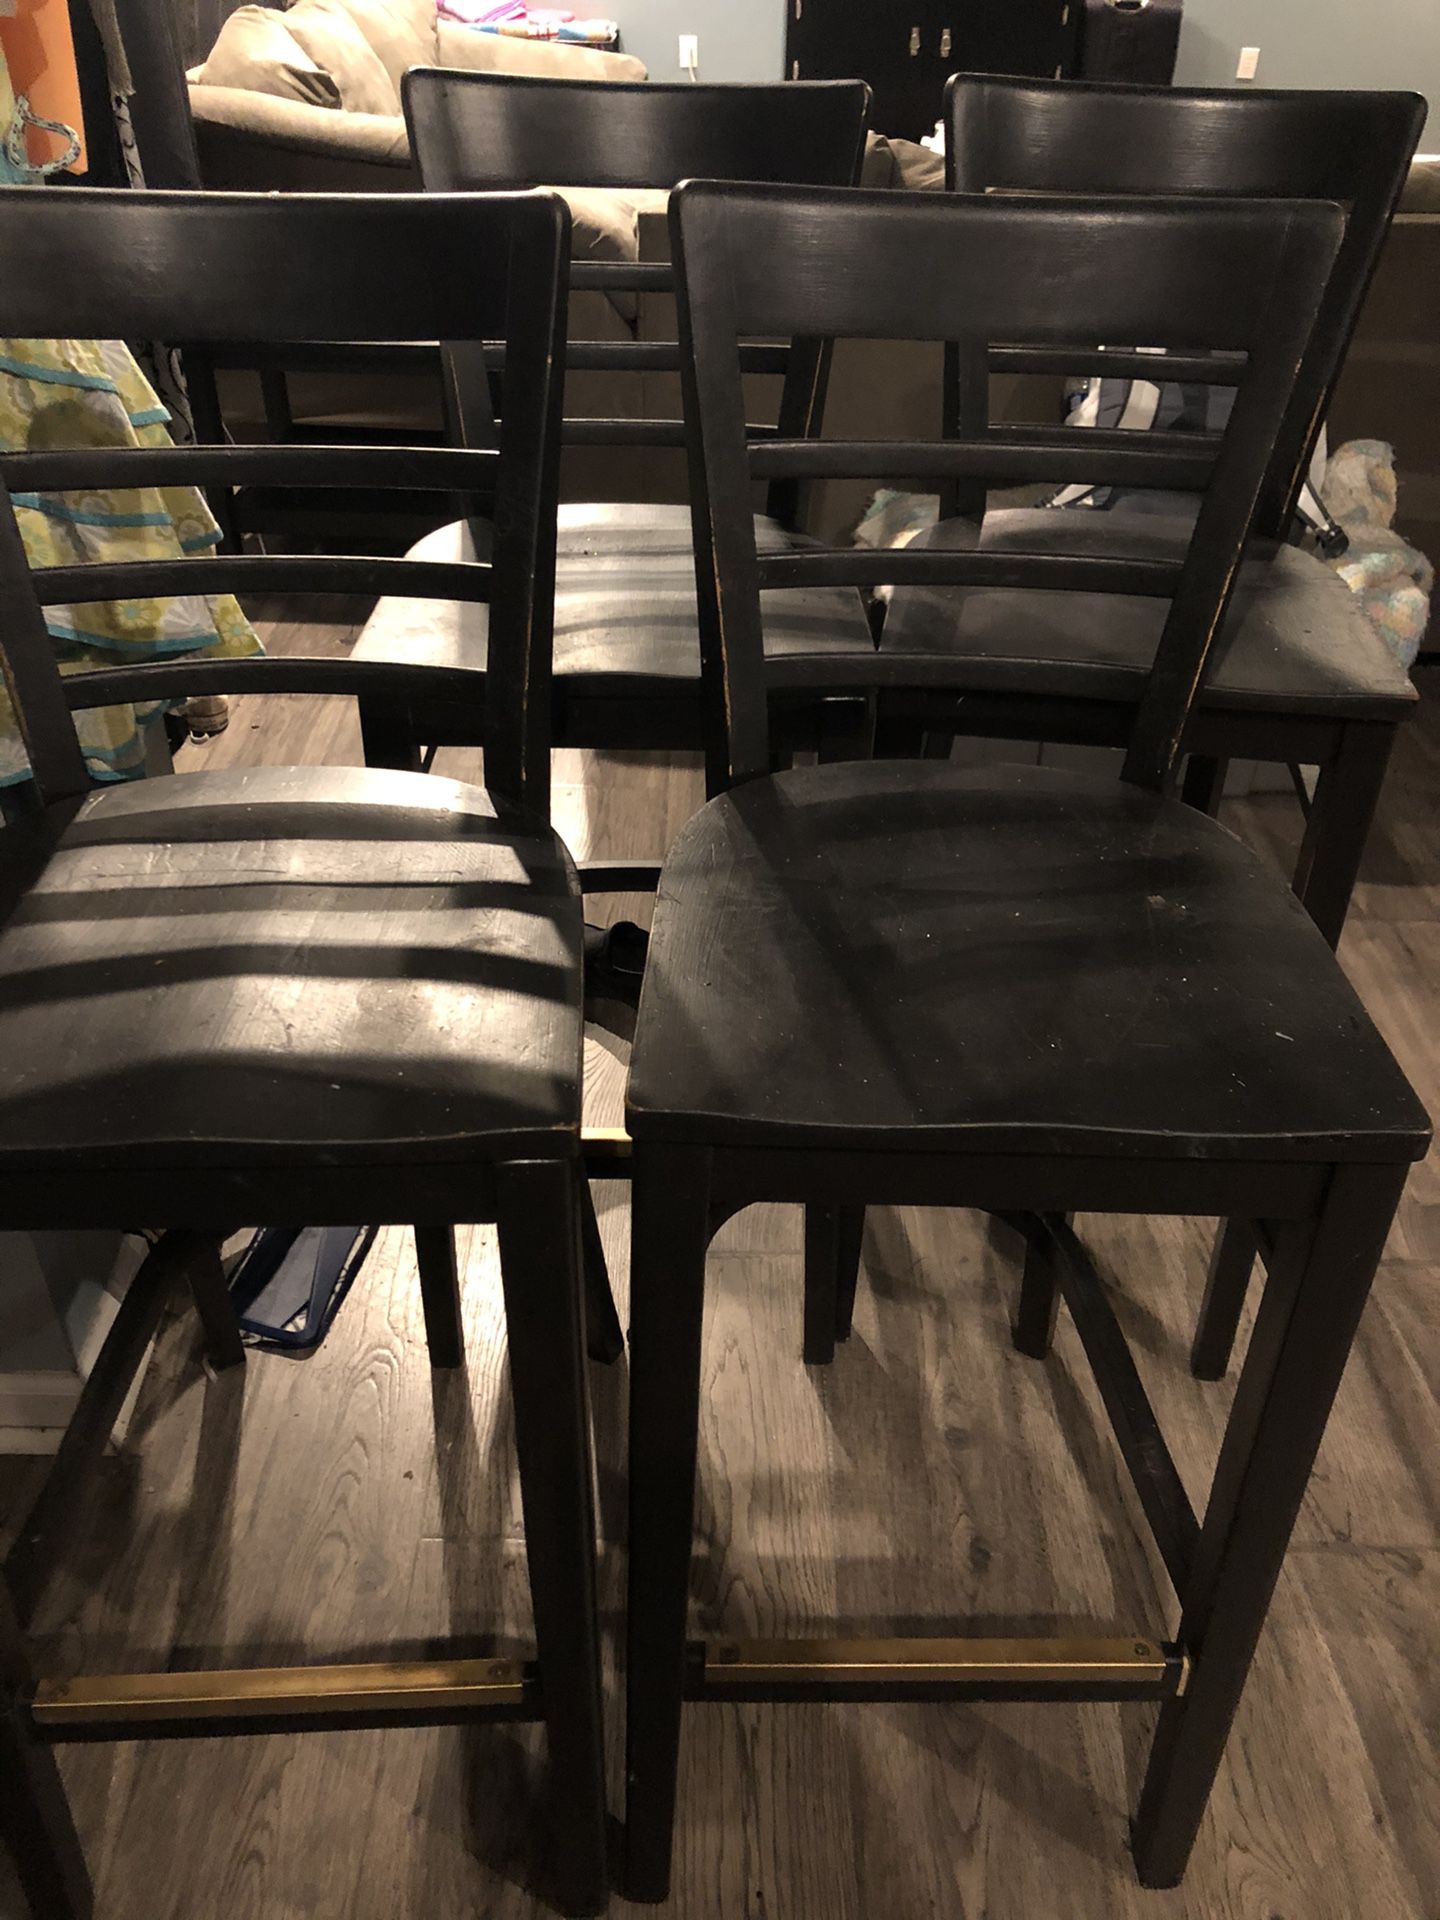 Bar stool chairs set of 4 (23 1/2 inches from floor to seat and 43 1/2 inches total) will deliver within a reasonable distance for extra cost !